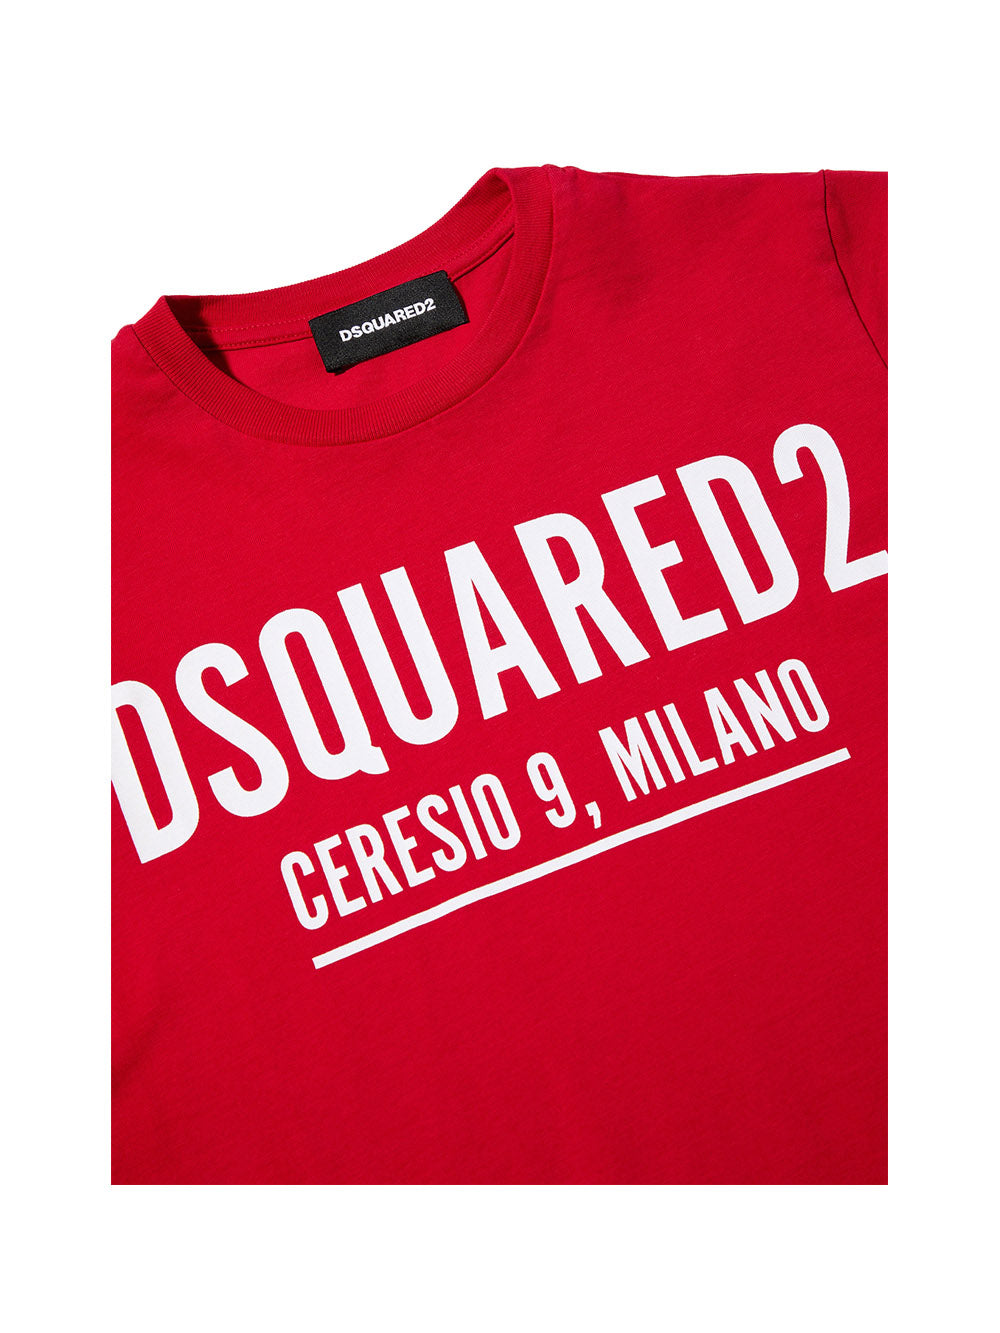 T-Shirt Logo Frontale Rosso